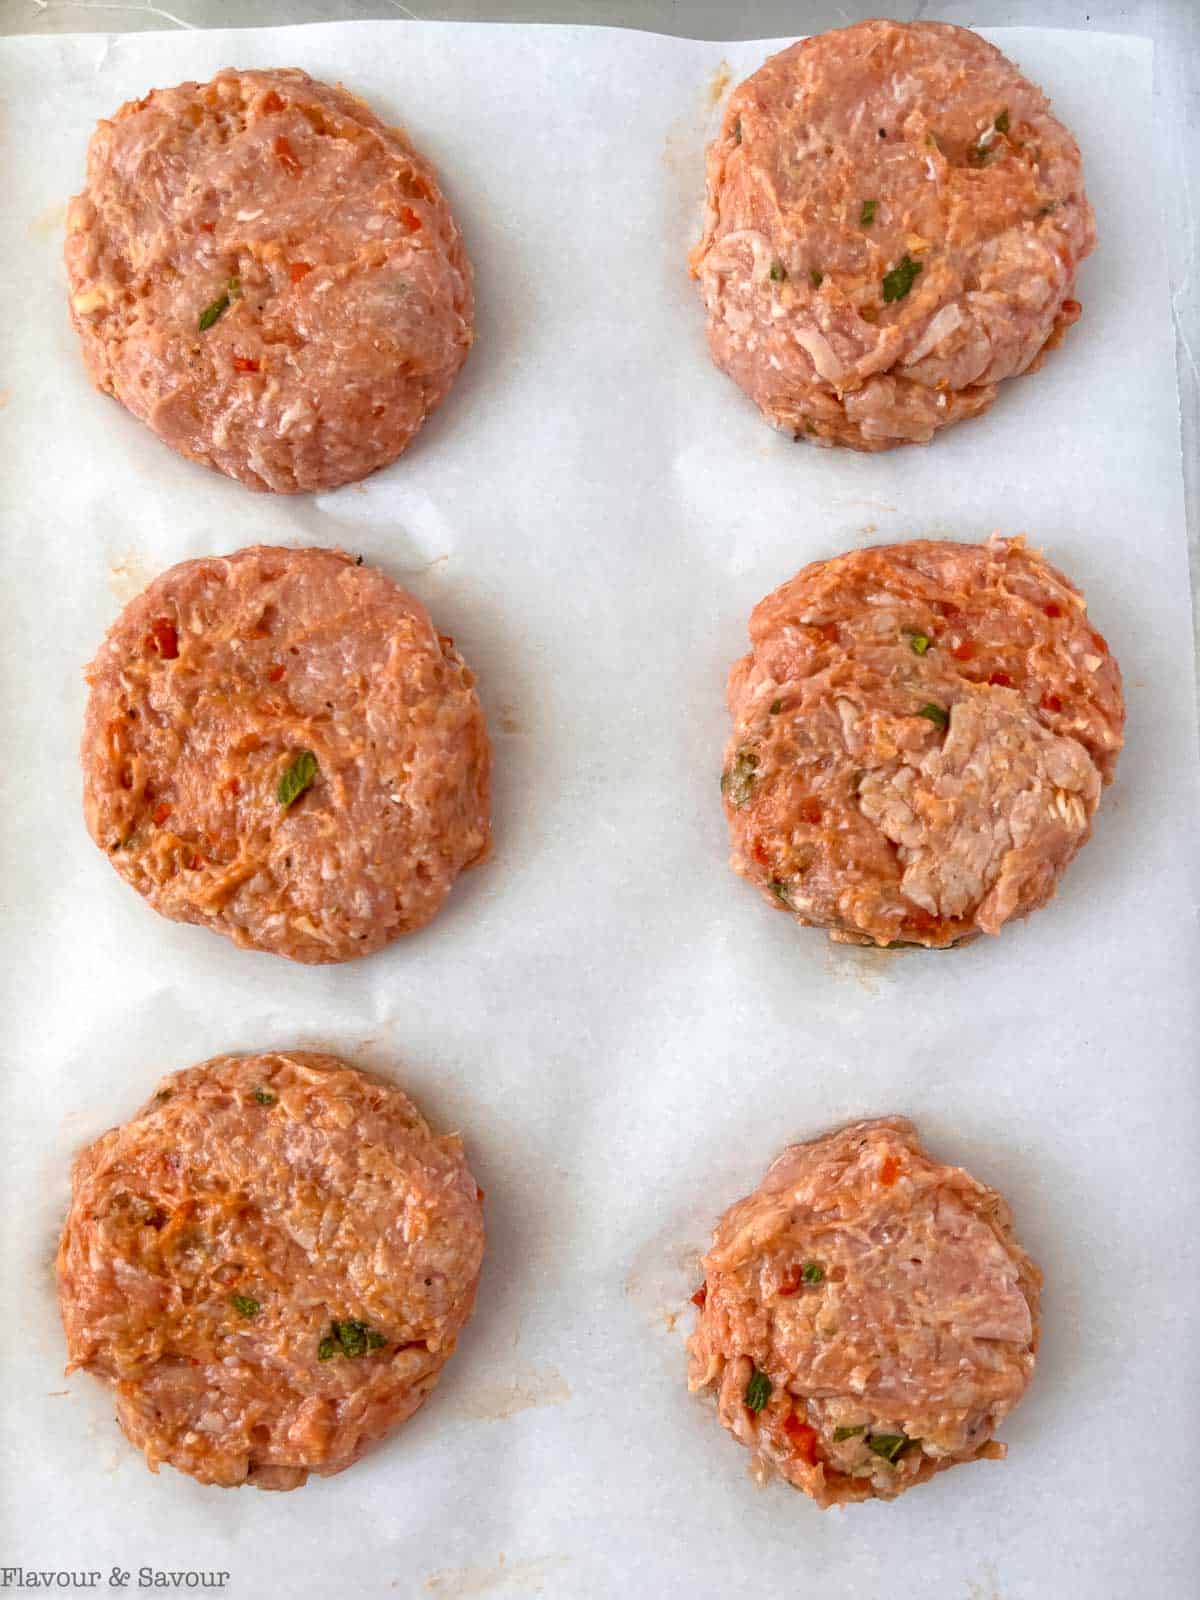 Raw chicken burgers on a sheet pan ready to freeze.